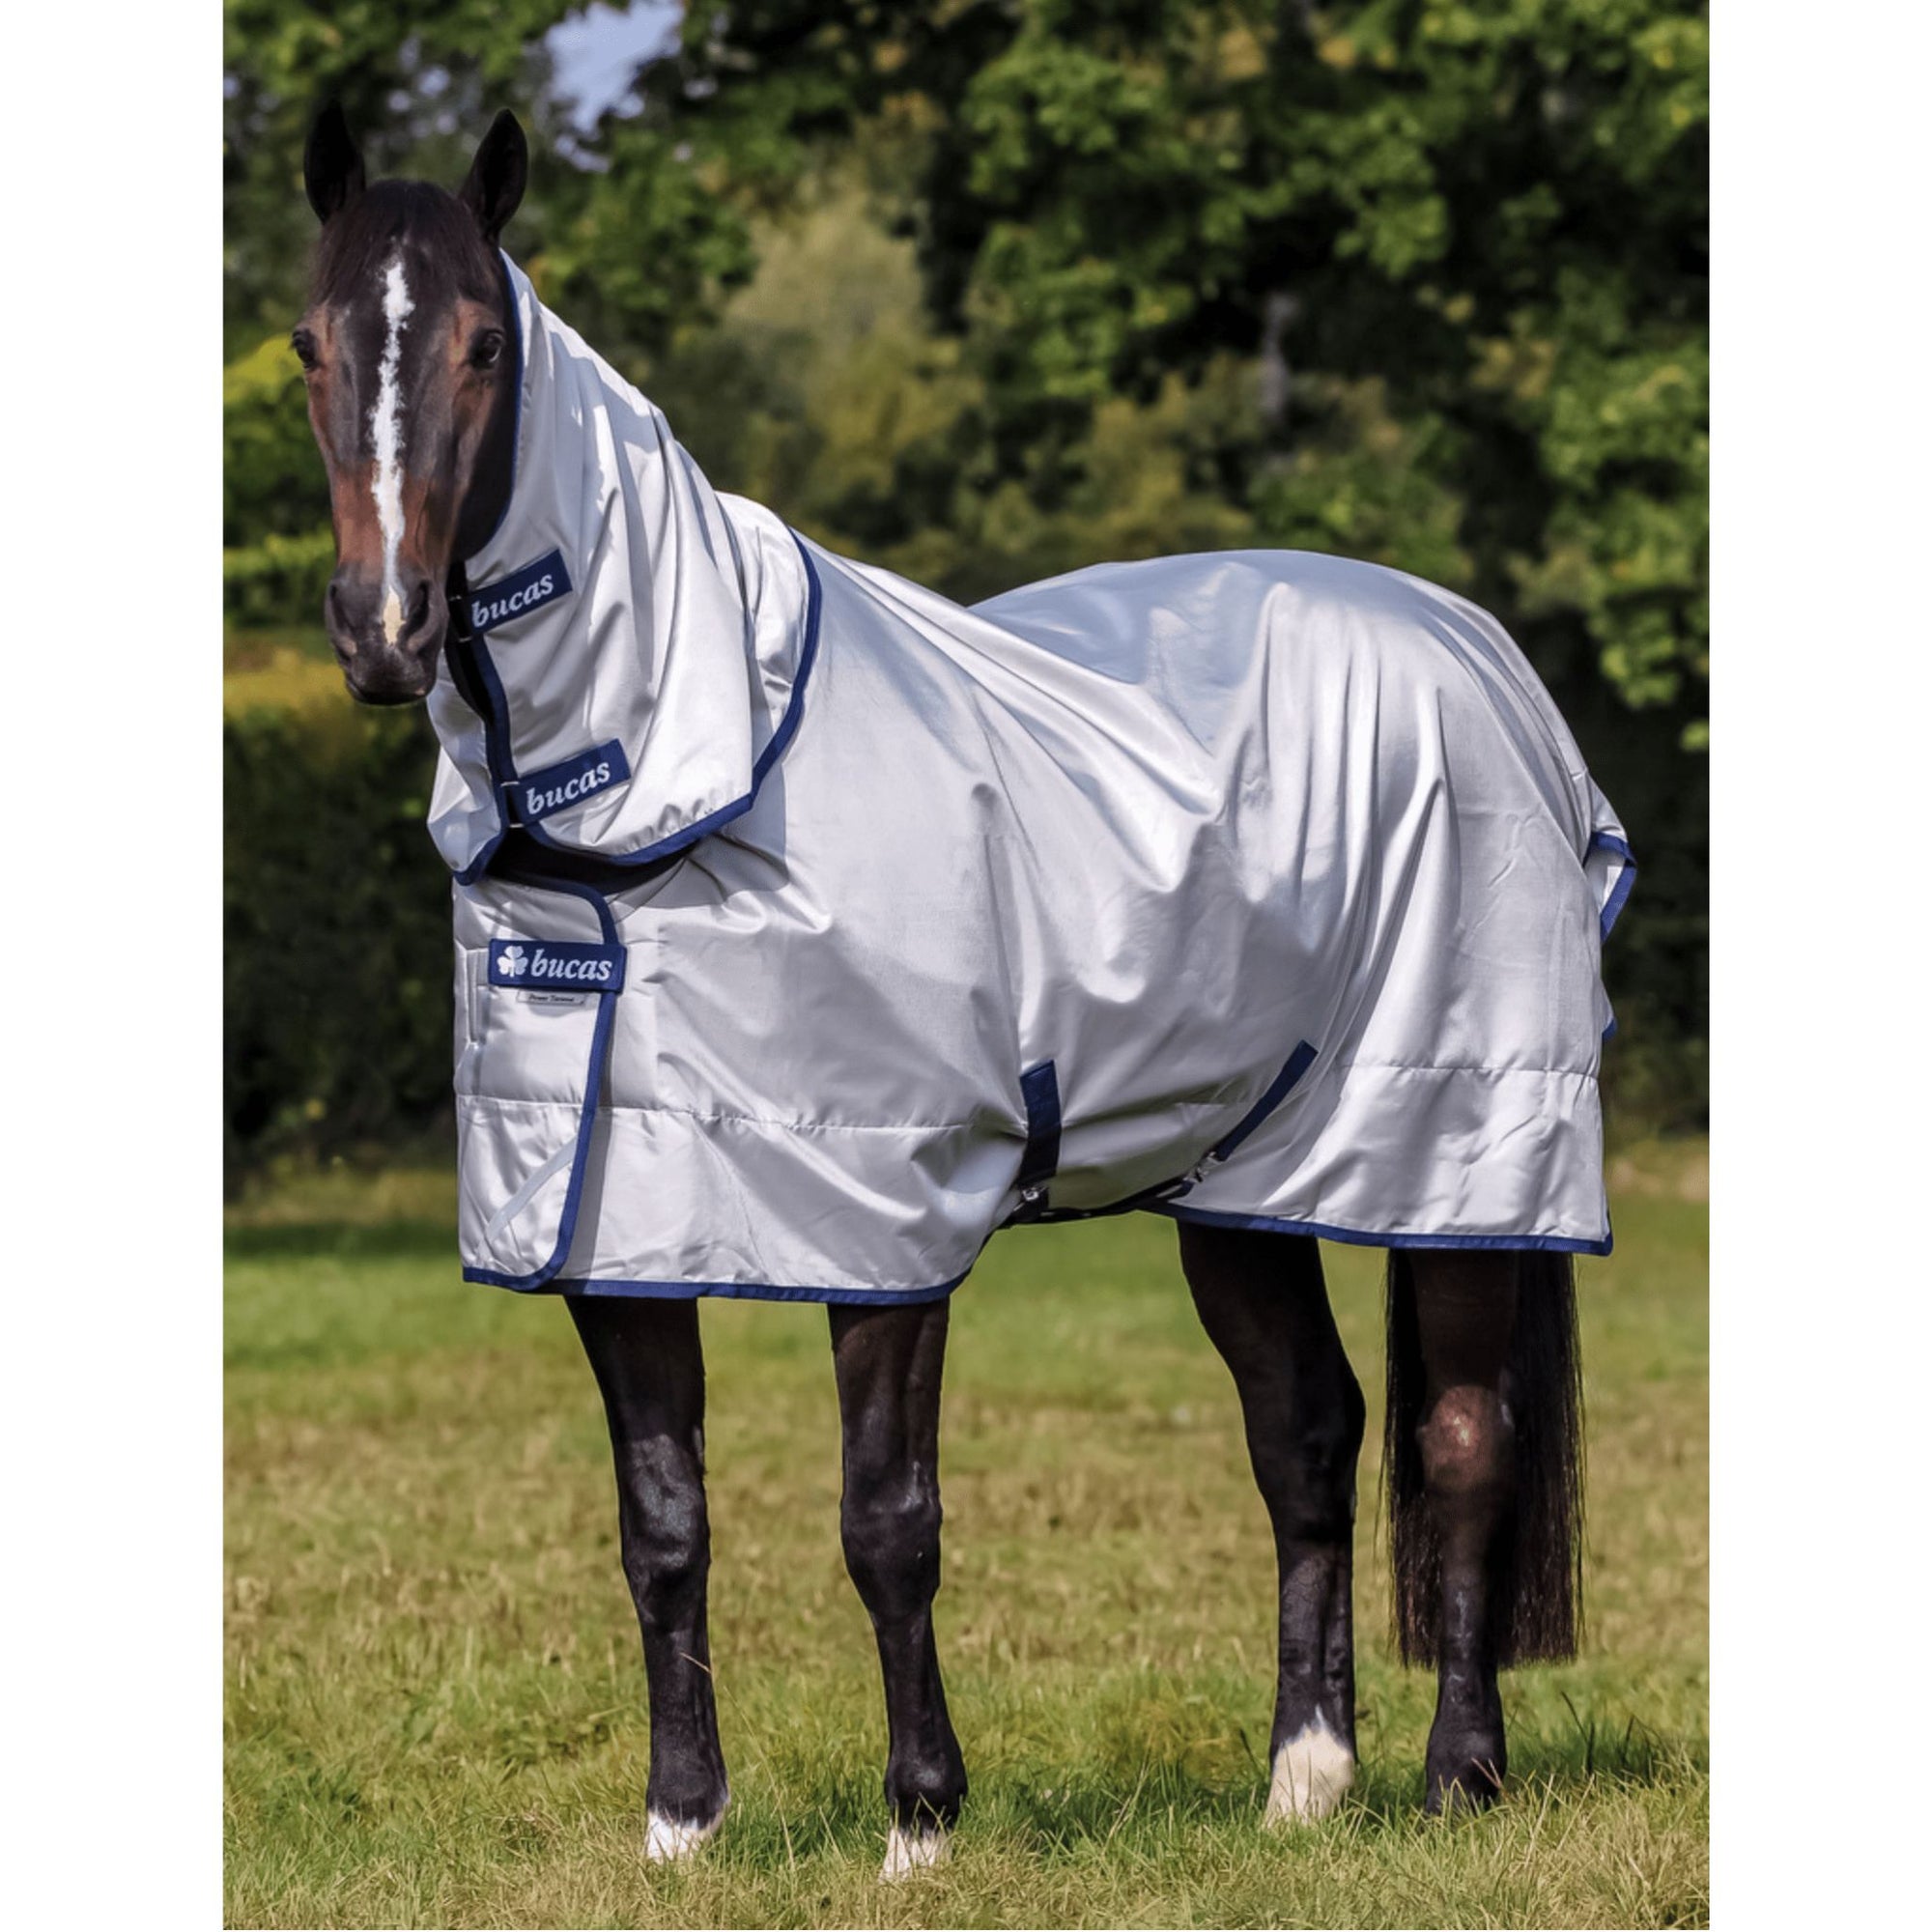 Grey horse wearing silver Bucas rug, cantering along  fence line.